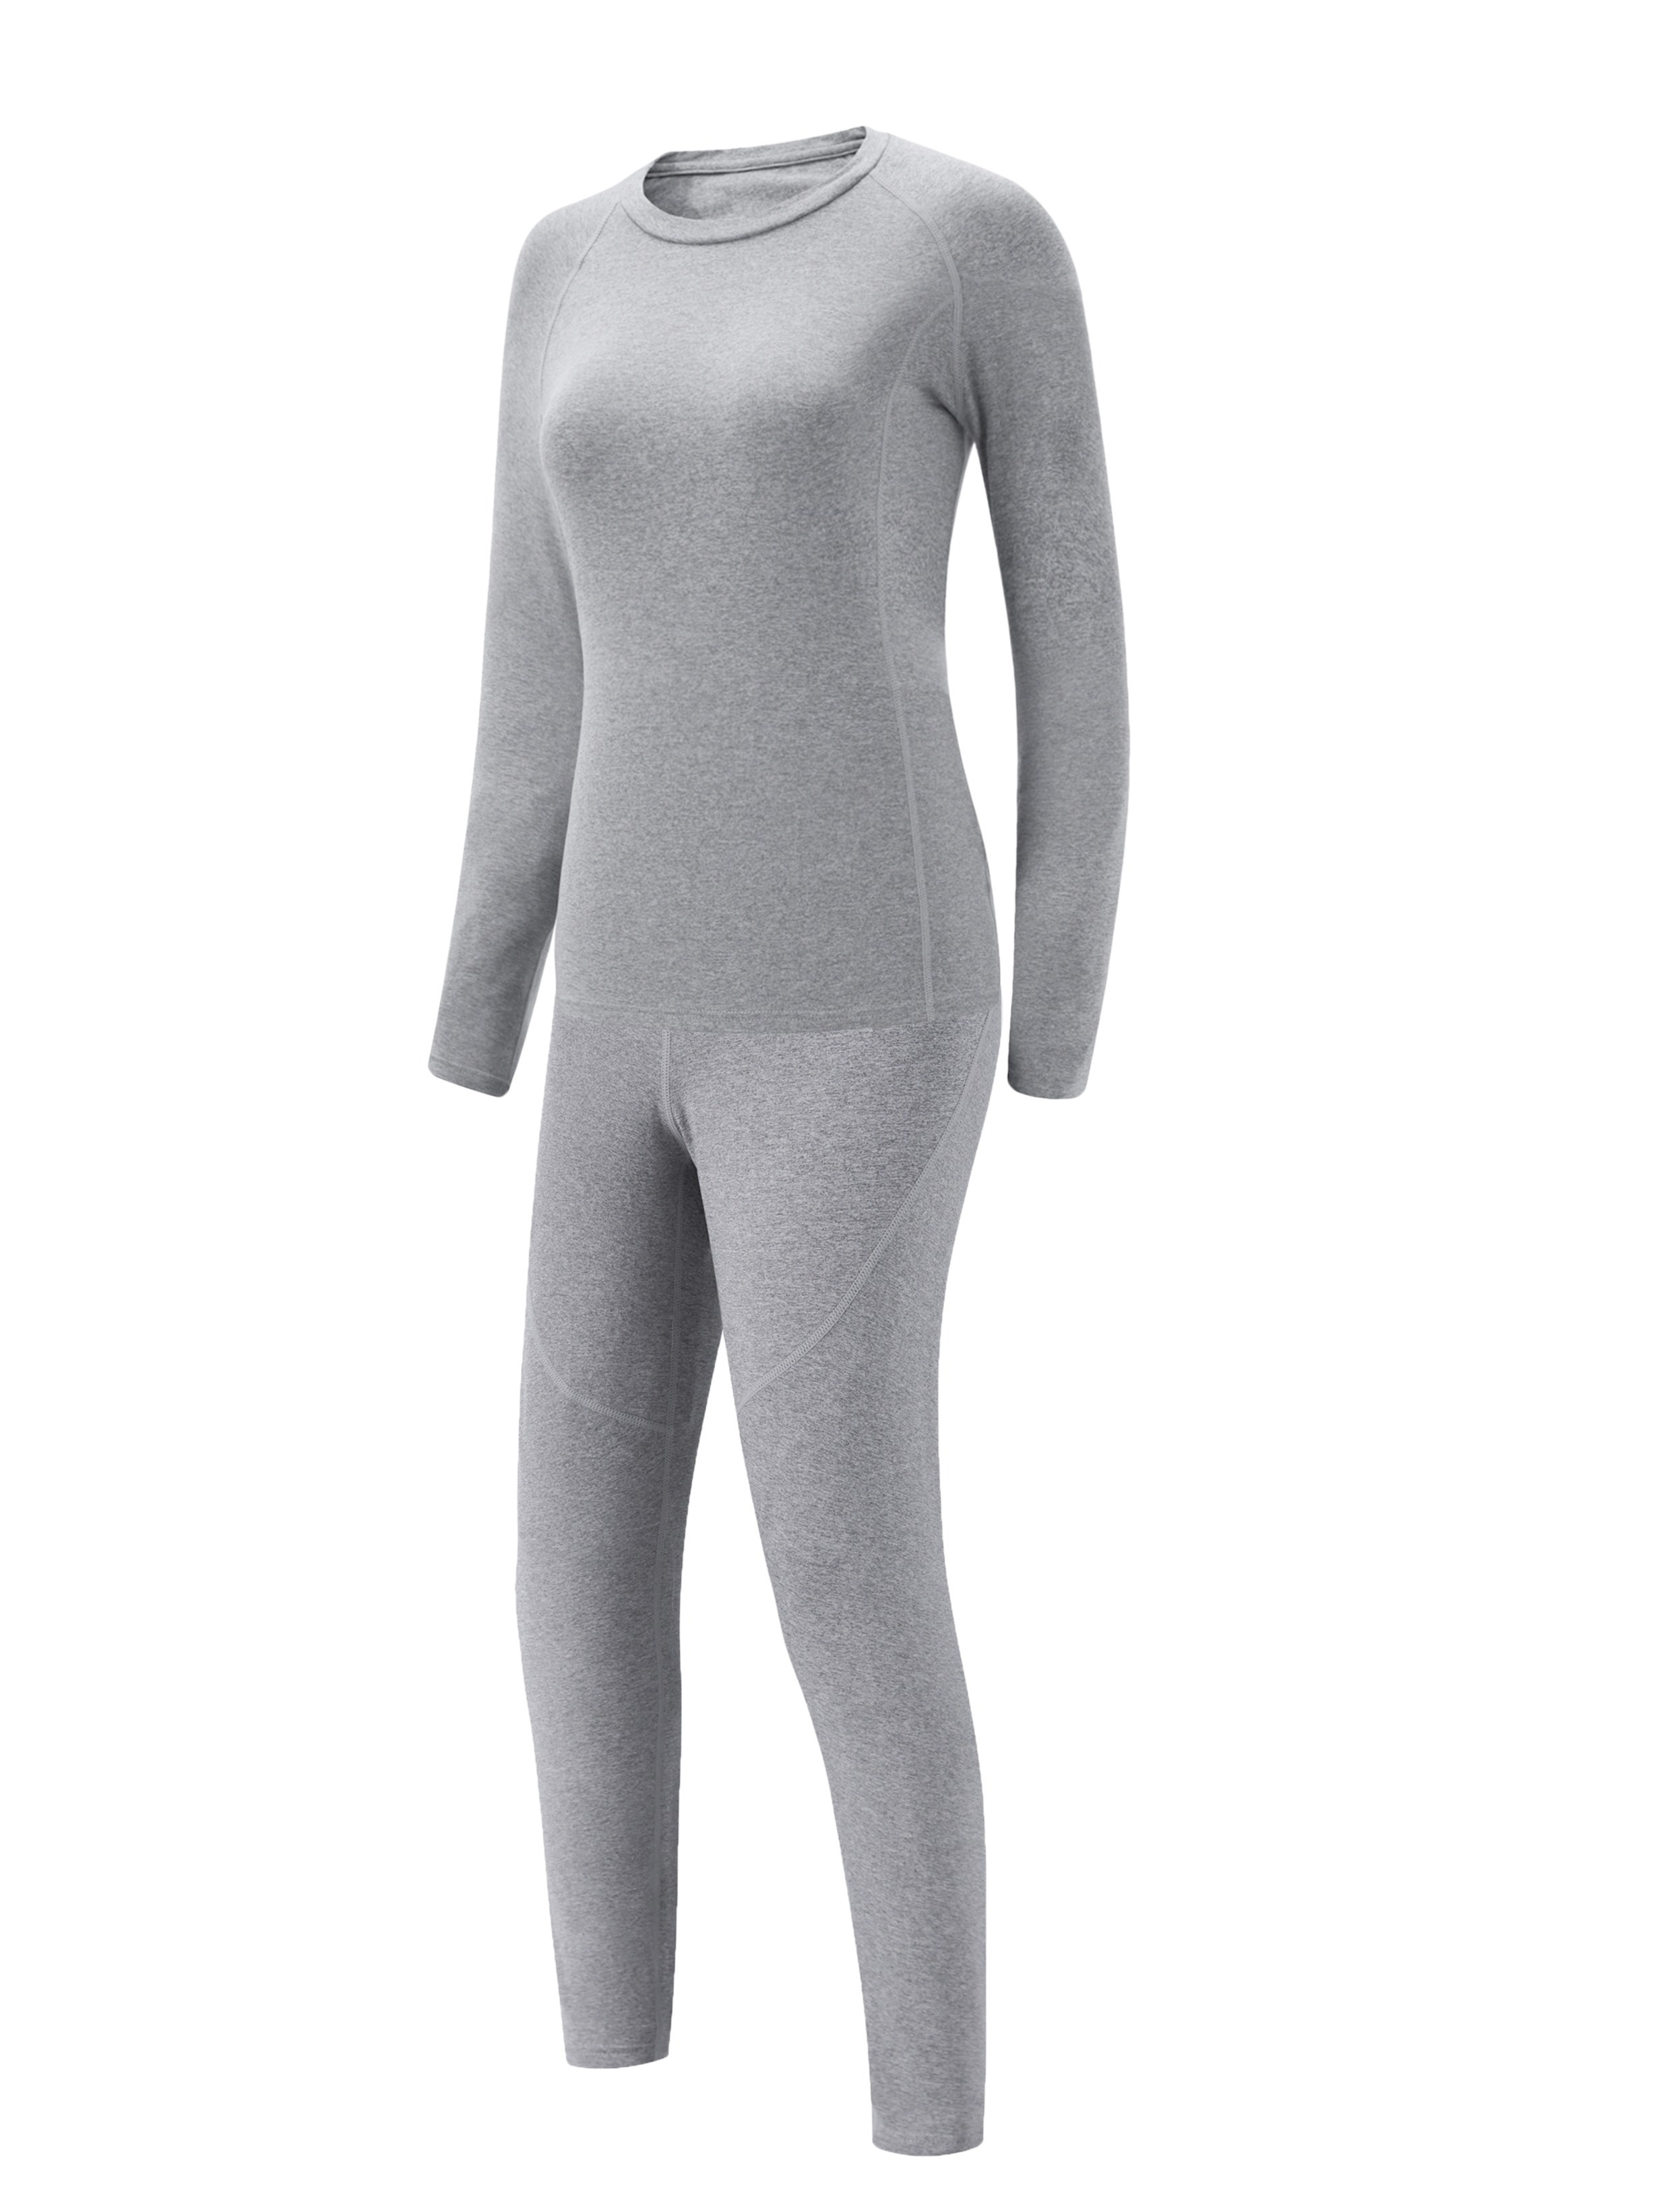 Buy Thermajane Women's Ultra Soft Thermal Underwear Long Johns Set with  Fleece Lined (Small, Grey) at